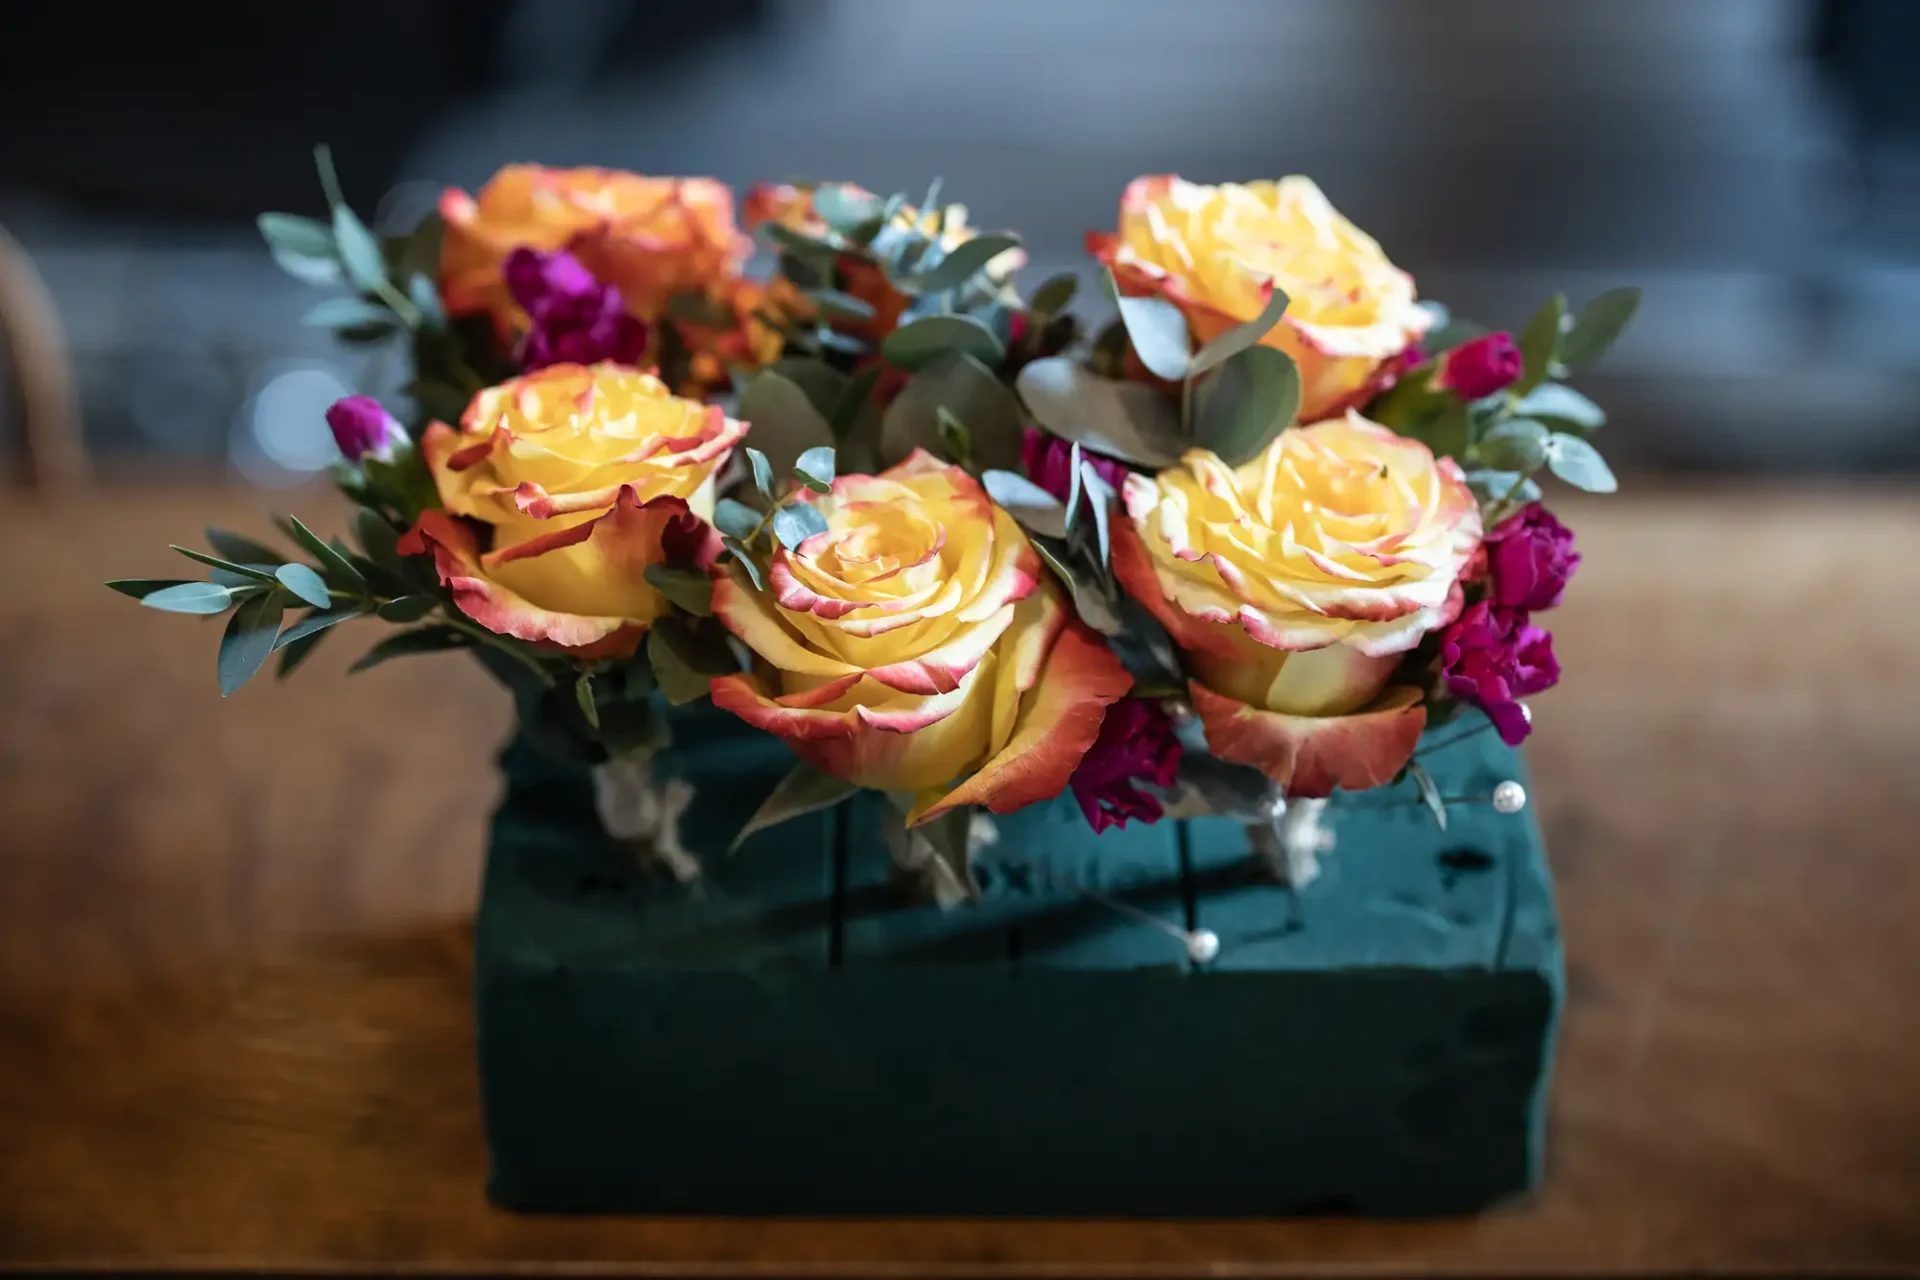 Floral arrangement featuring orange roses and purple flowers in a green square vase on a wooden table.